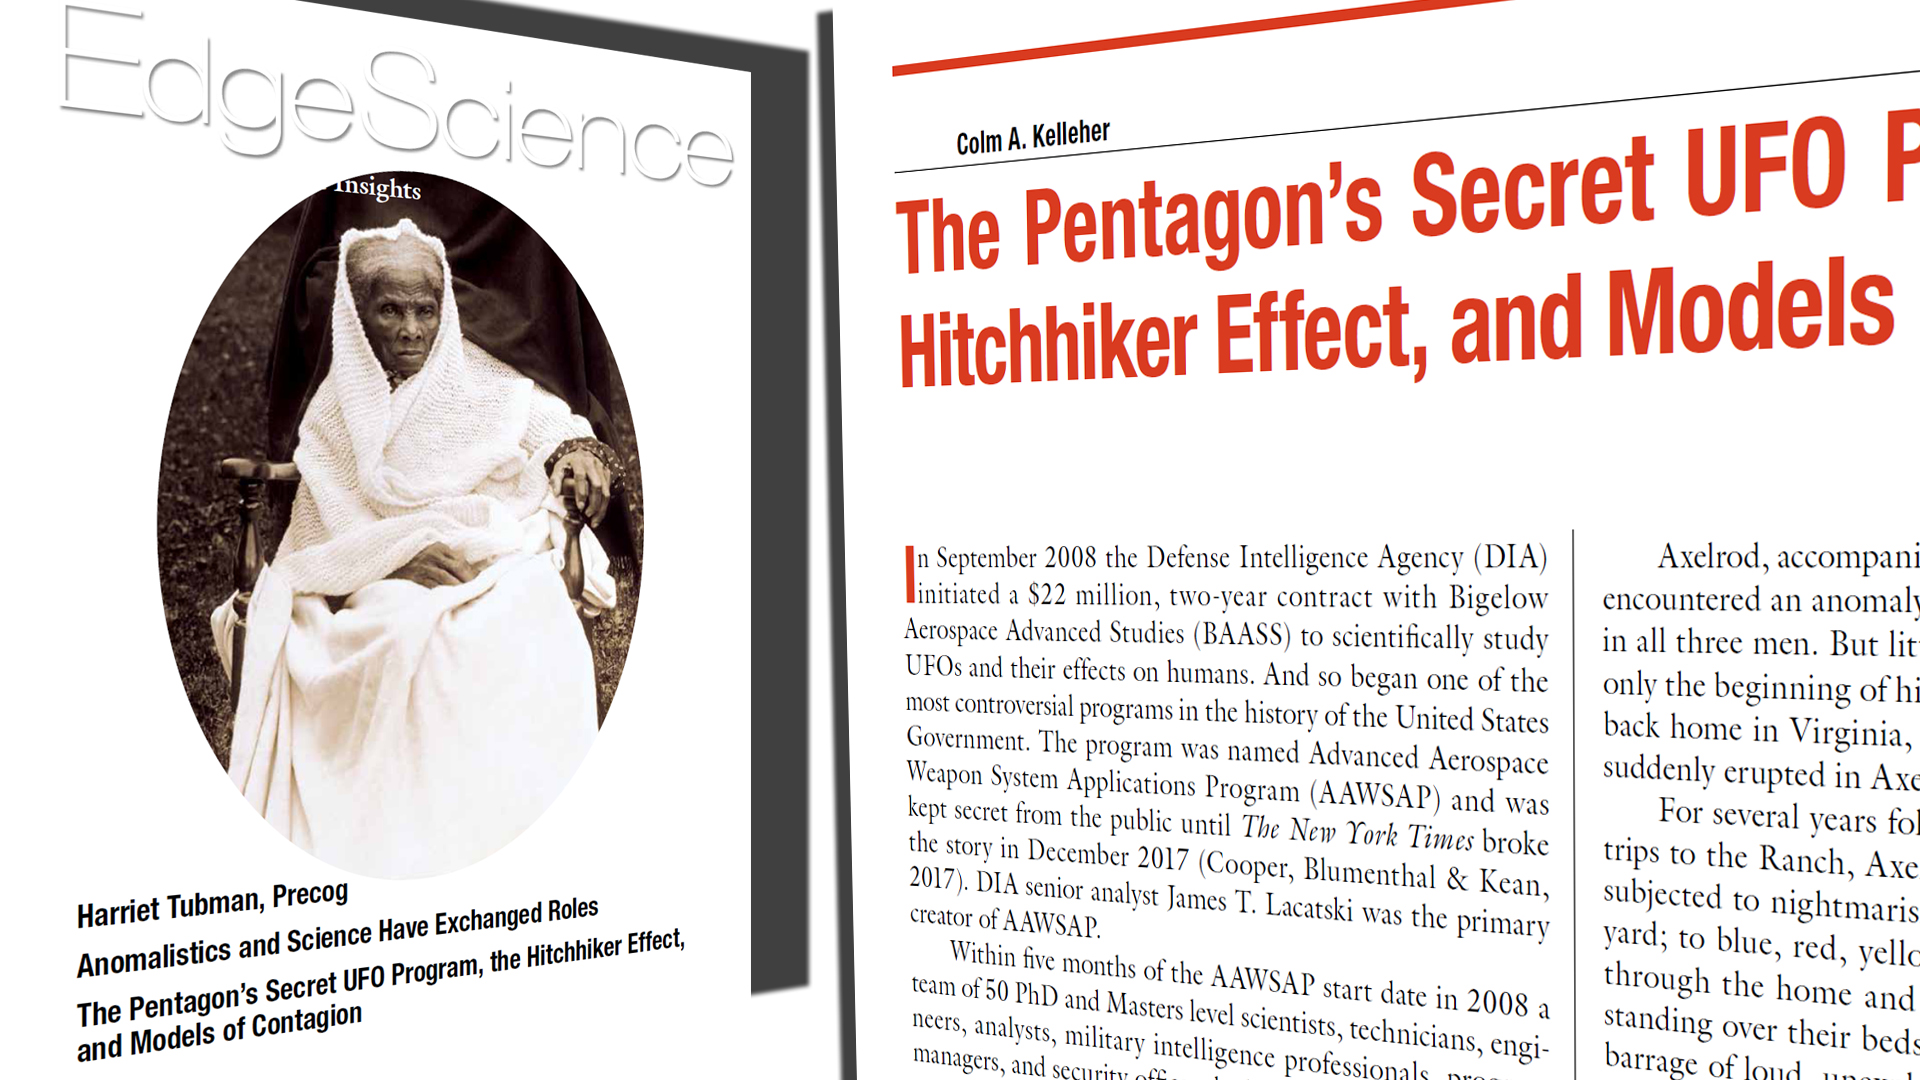 The Pentagon’s Secret UFO Program, the Hitchhiker Effect, and Models of Contagion, by Dr. Colm A. Kelleher